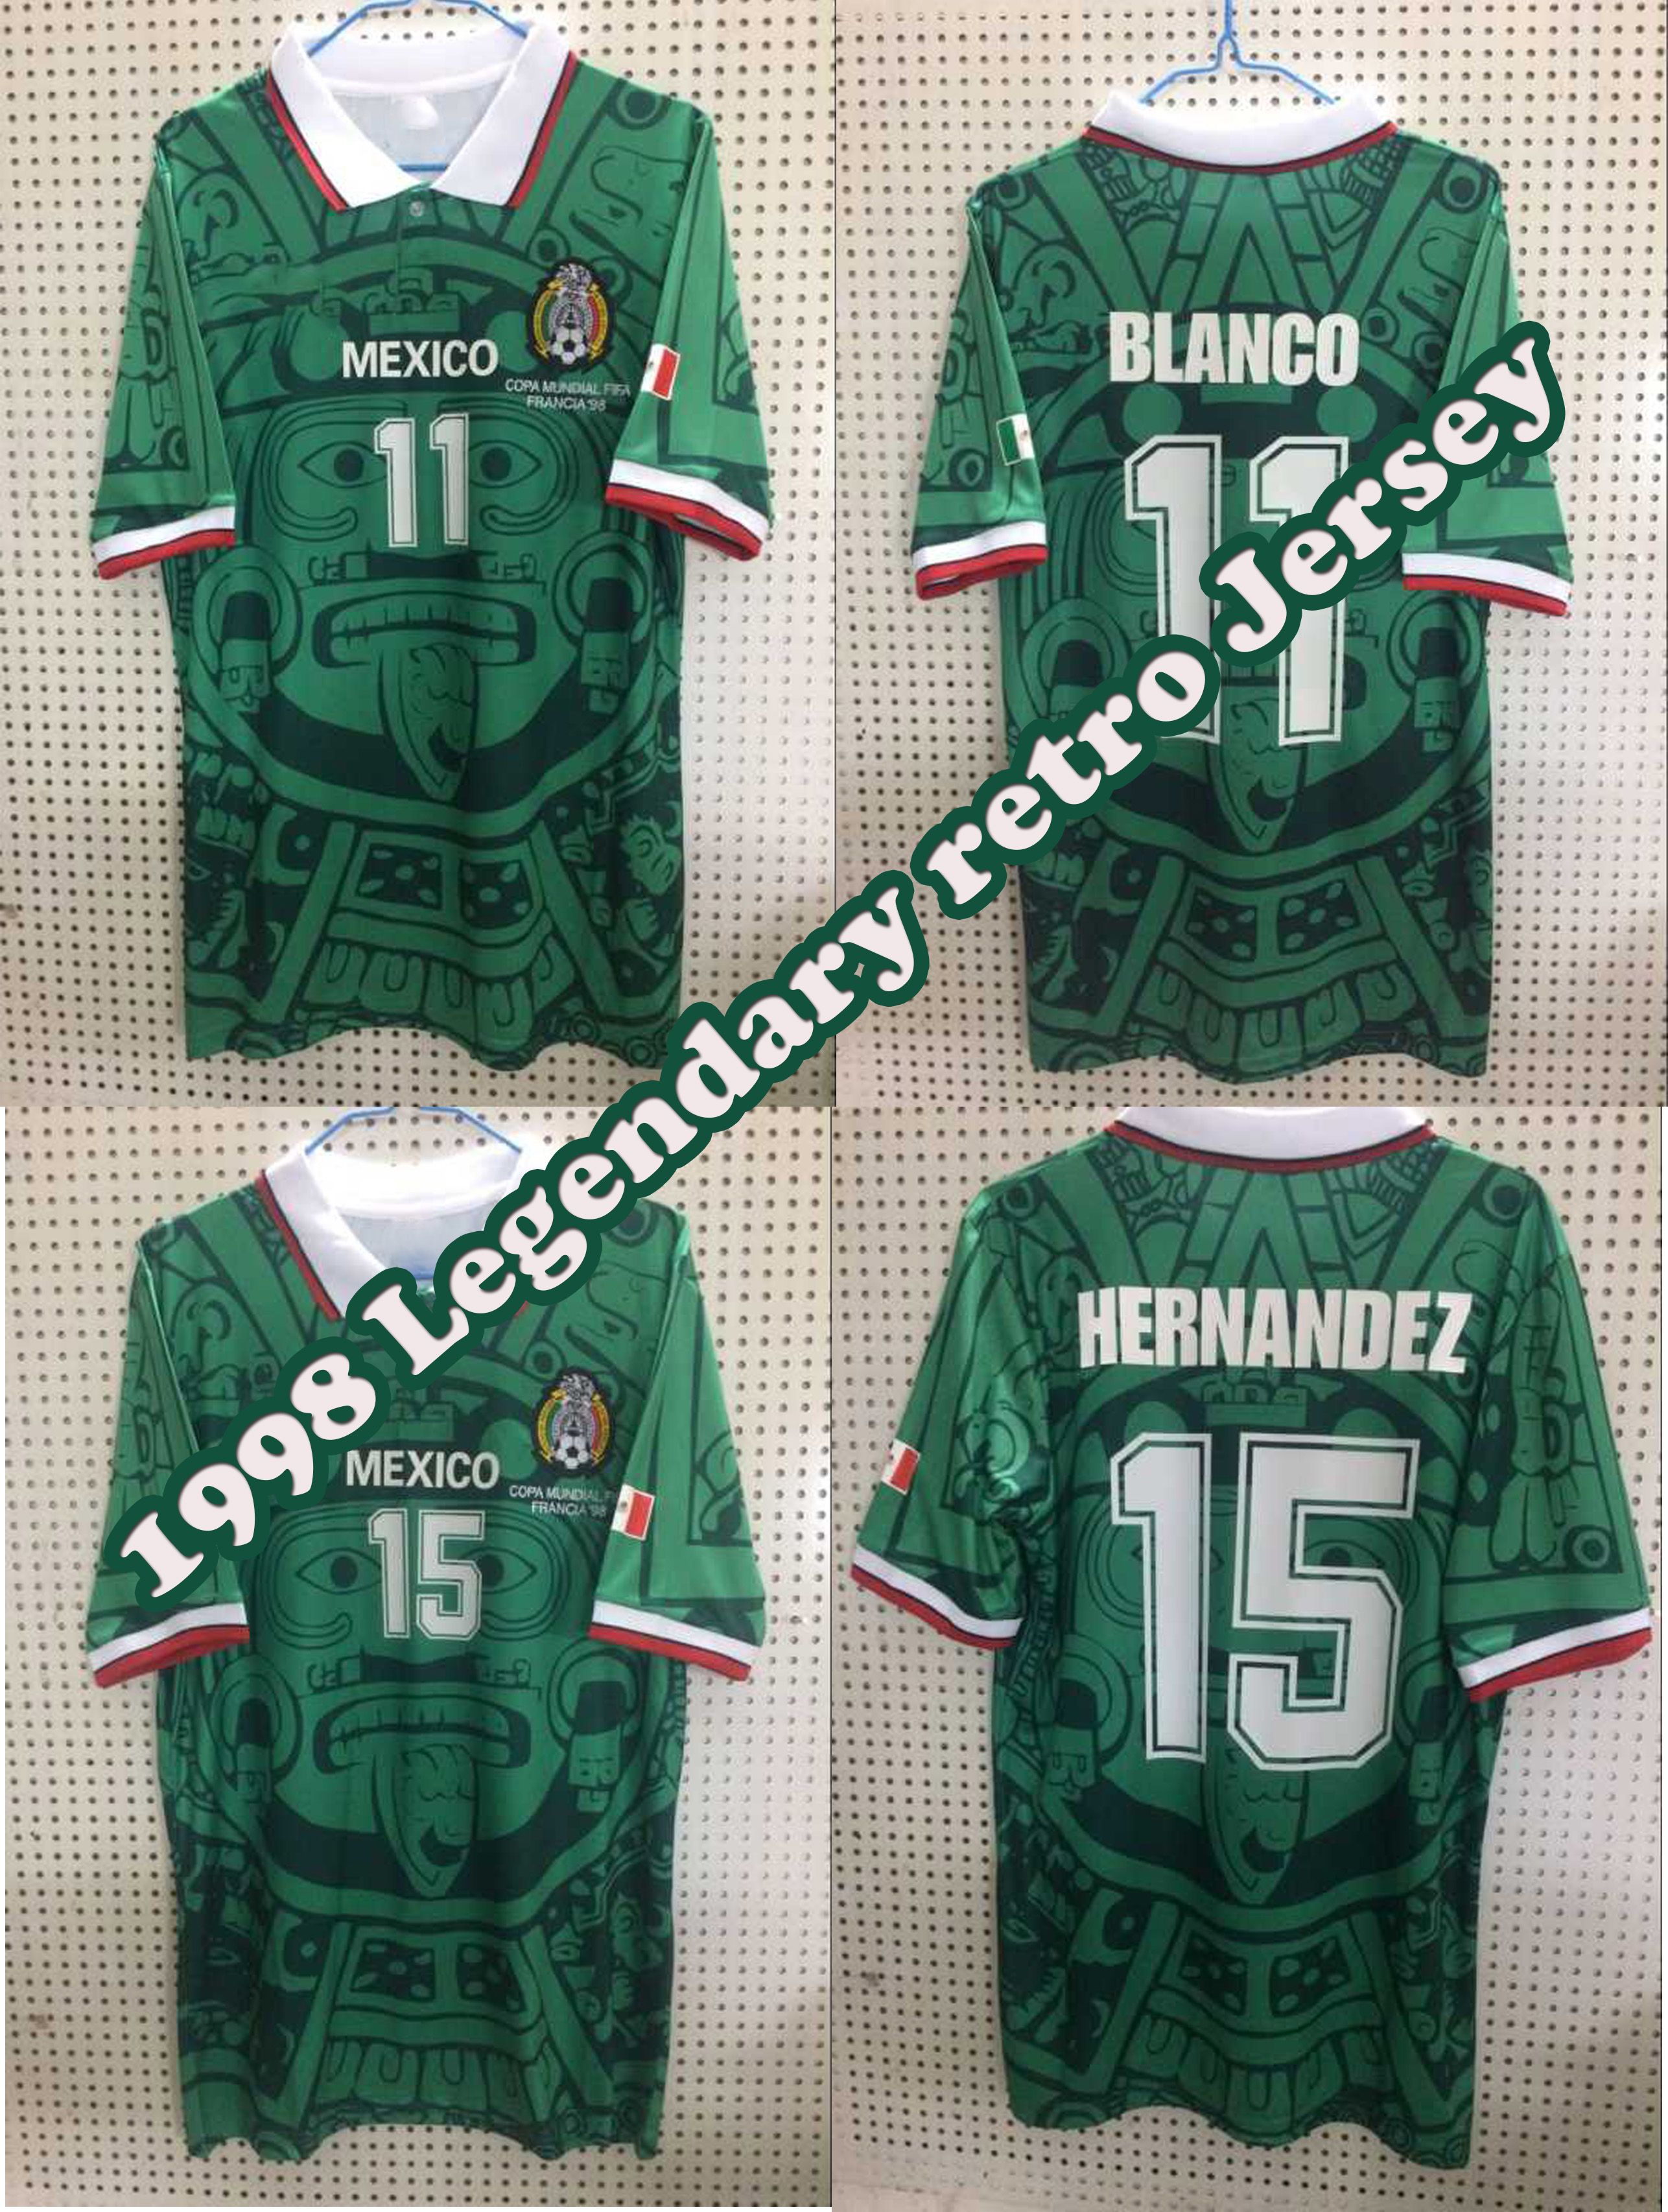 1998 world cup mexico jersey